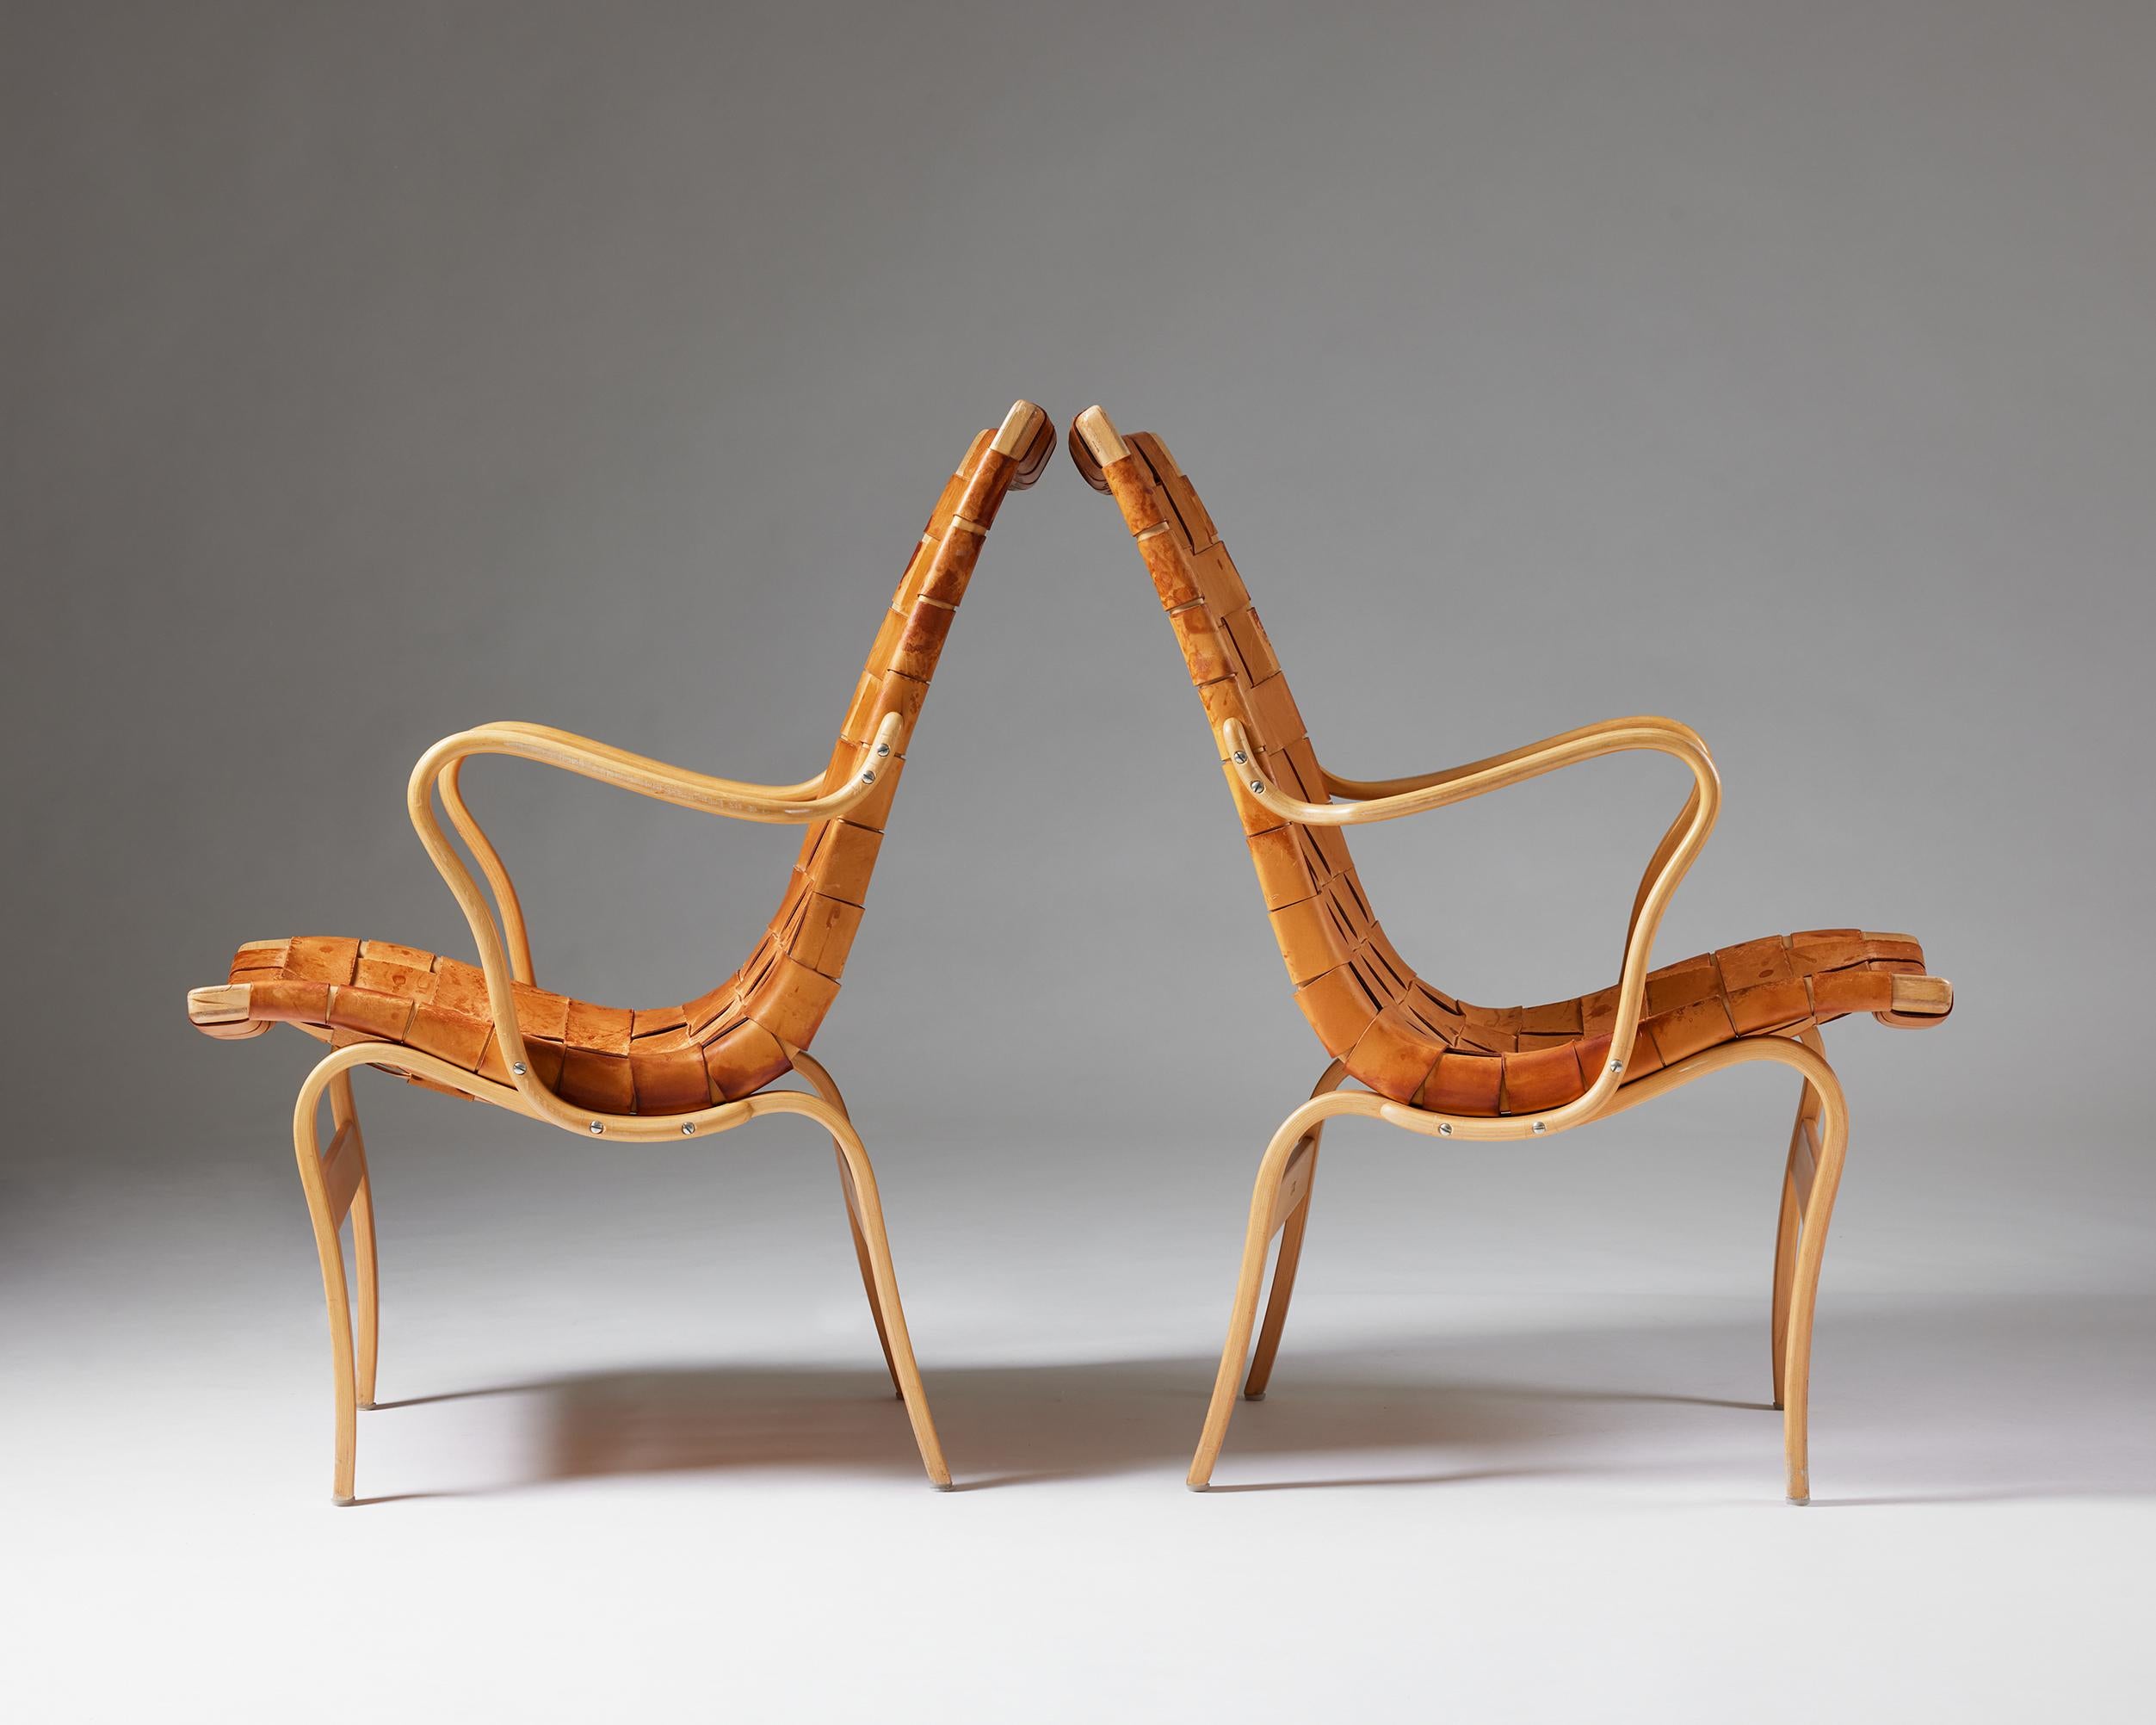 Leather Pair of armchairs ‘Eva’ designed by Bruno Mathsson for Karl Mathsson, Swedish For Sale